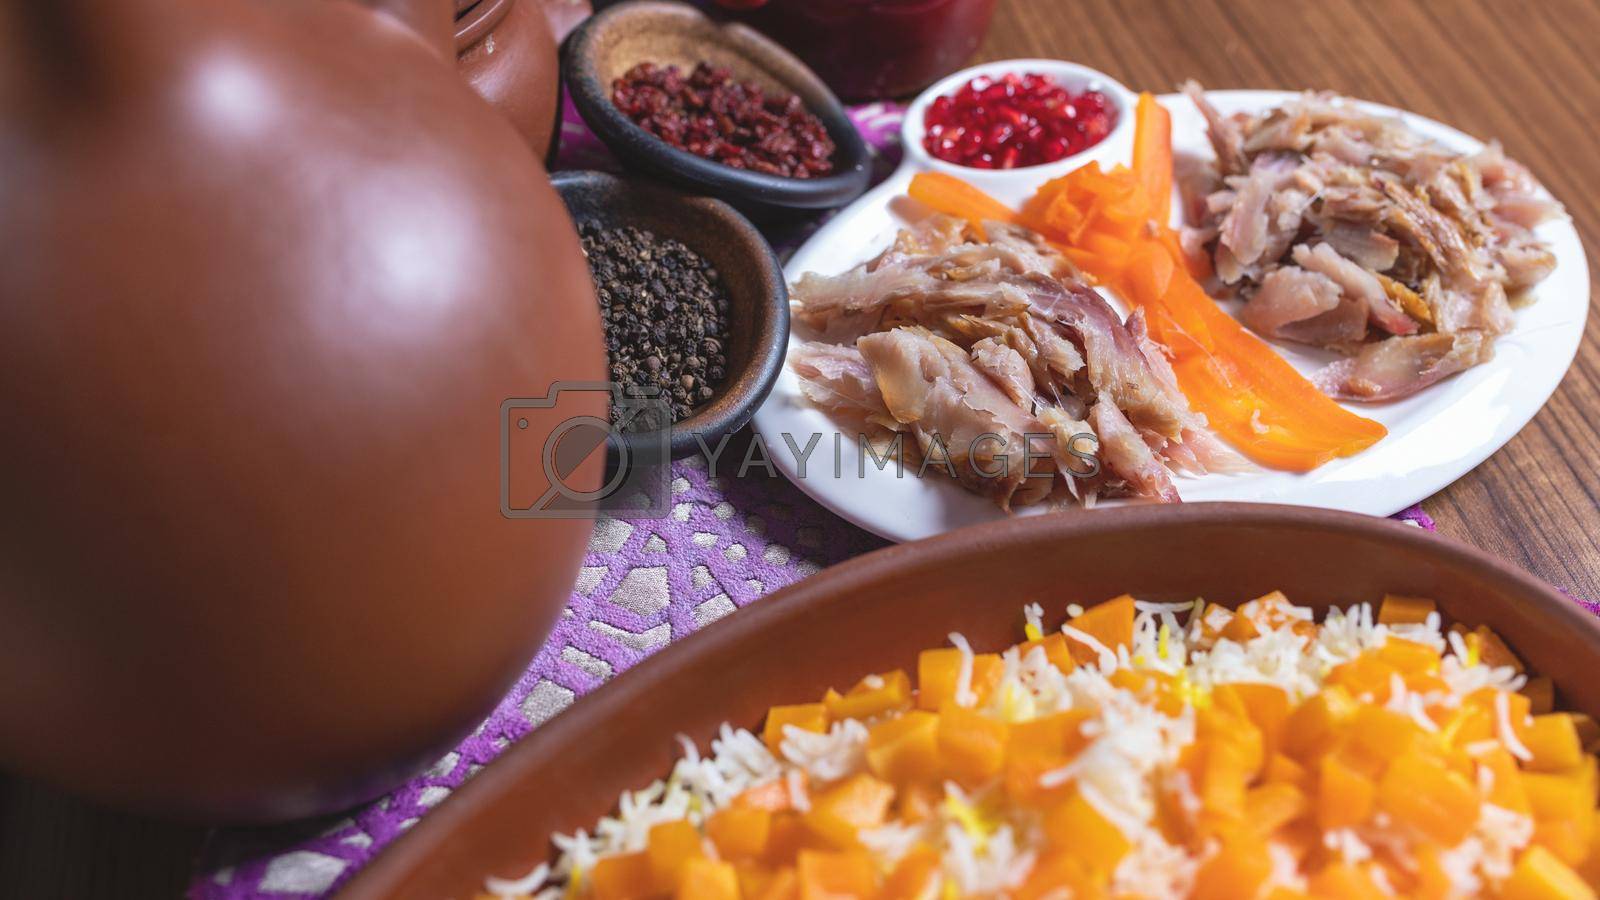 Royalty free image of Chopped fish meal with pumpkin close up by ferhad